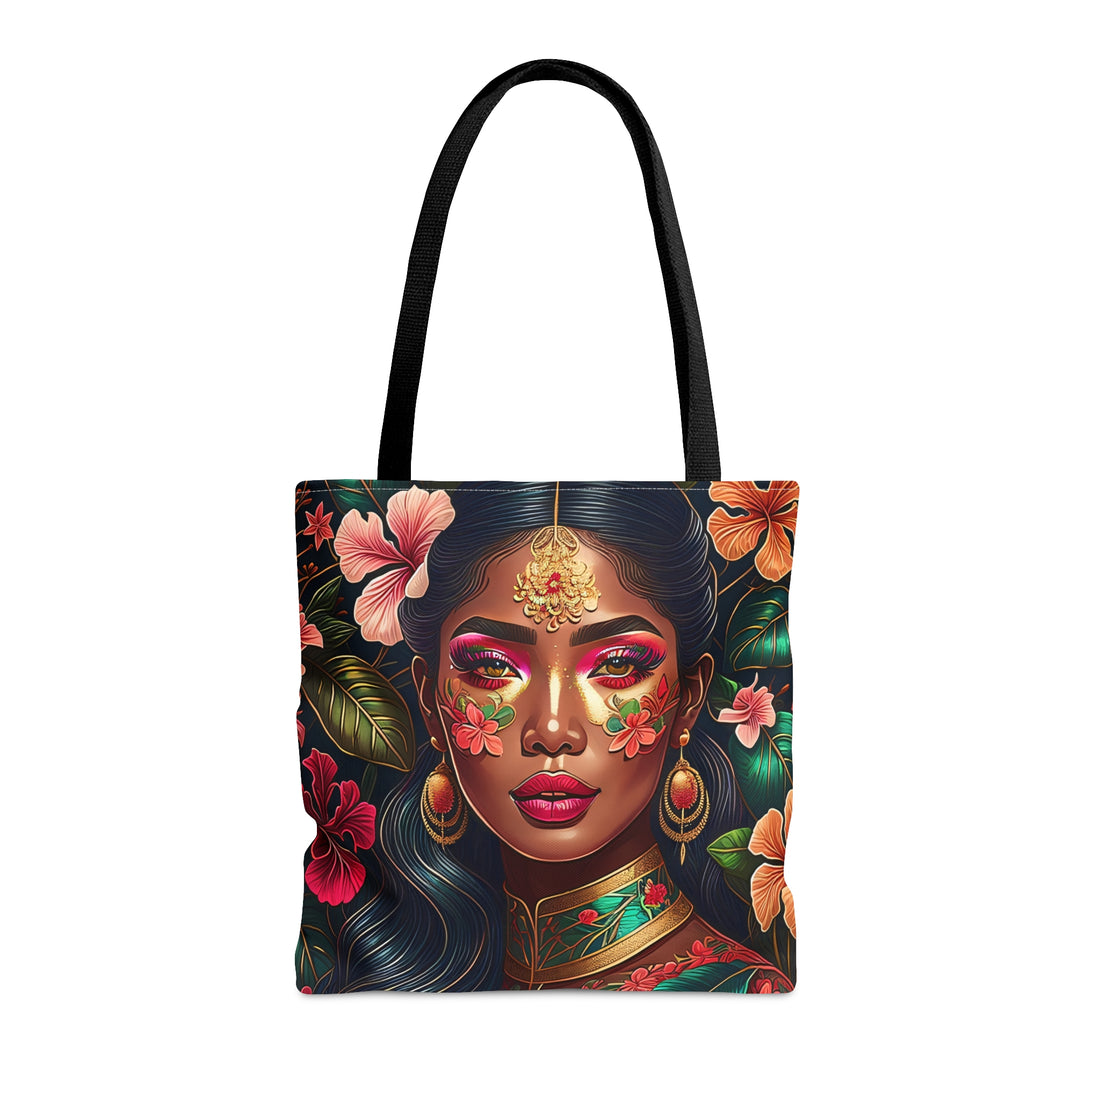 Confidence of a Heroine Tote Bag